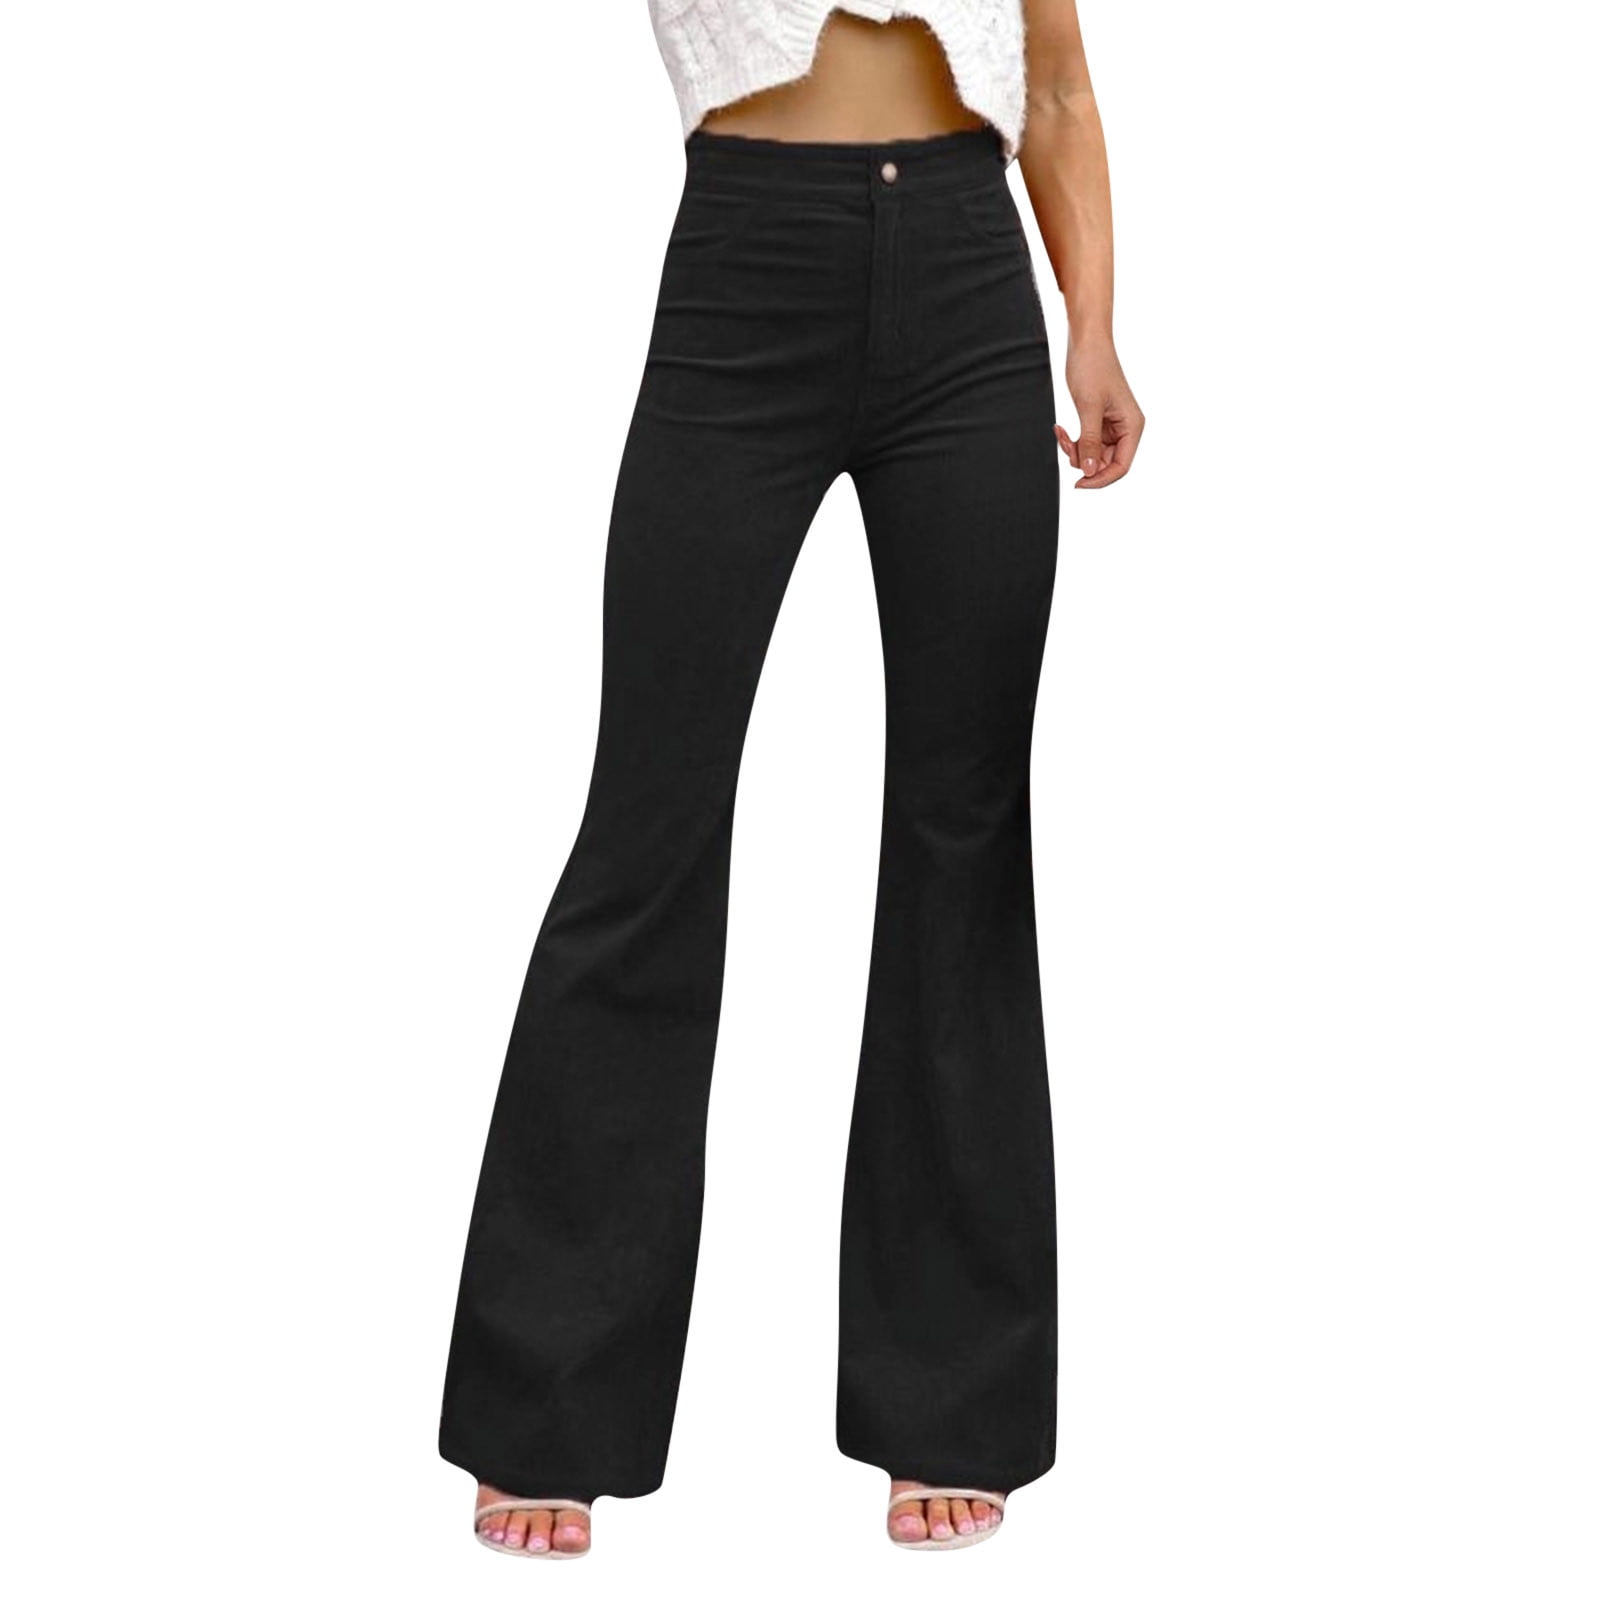 Womens Corduroy Pants Solid Color High Waist Stretchy Elastic Waist Flare  Pants Fashion Palazzo Trousers for Ladies